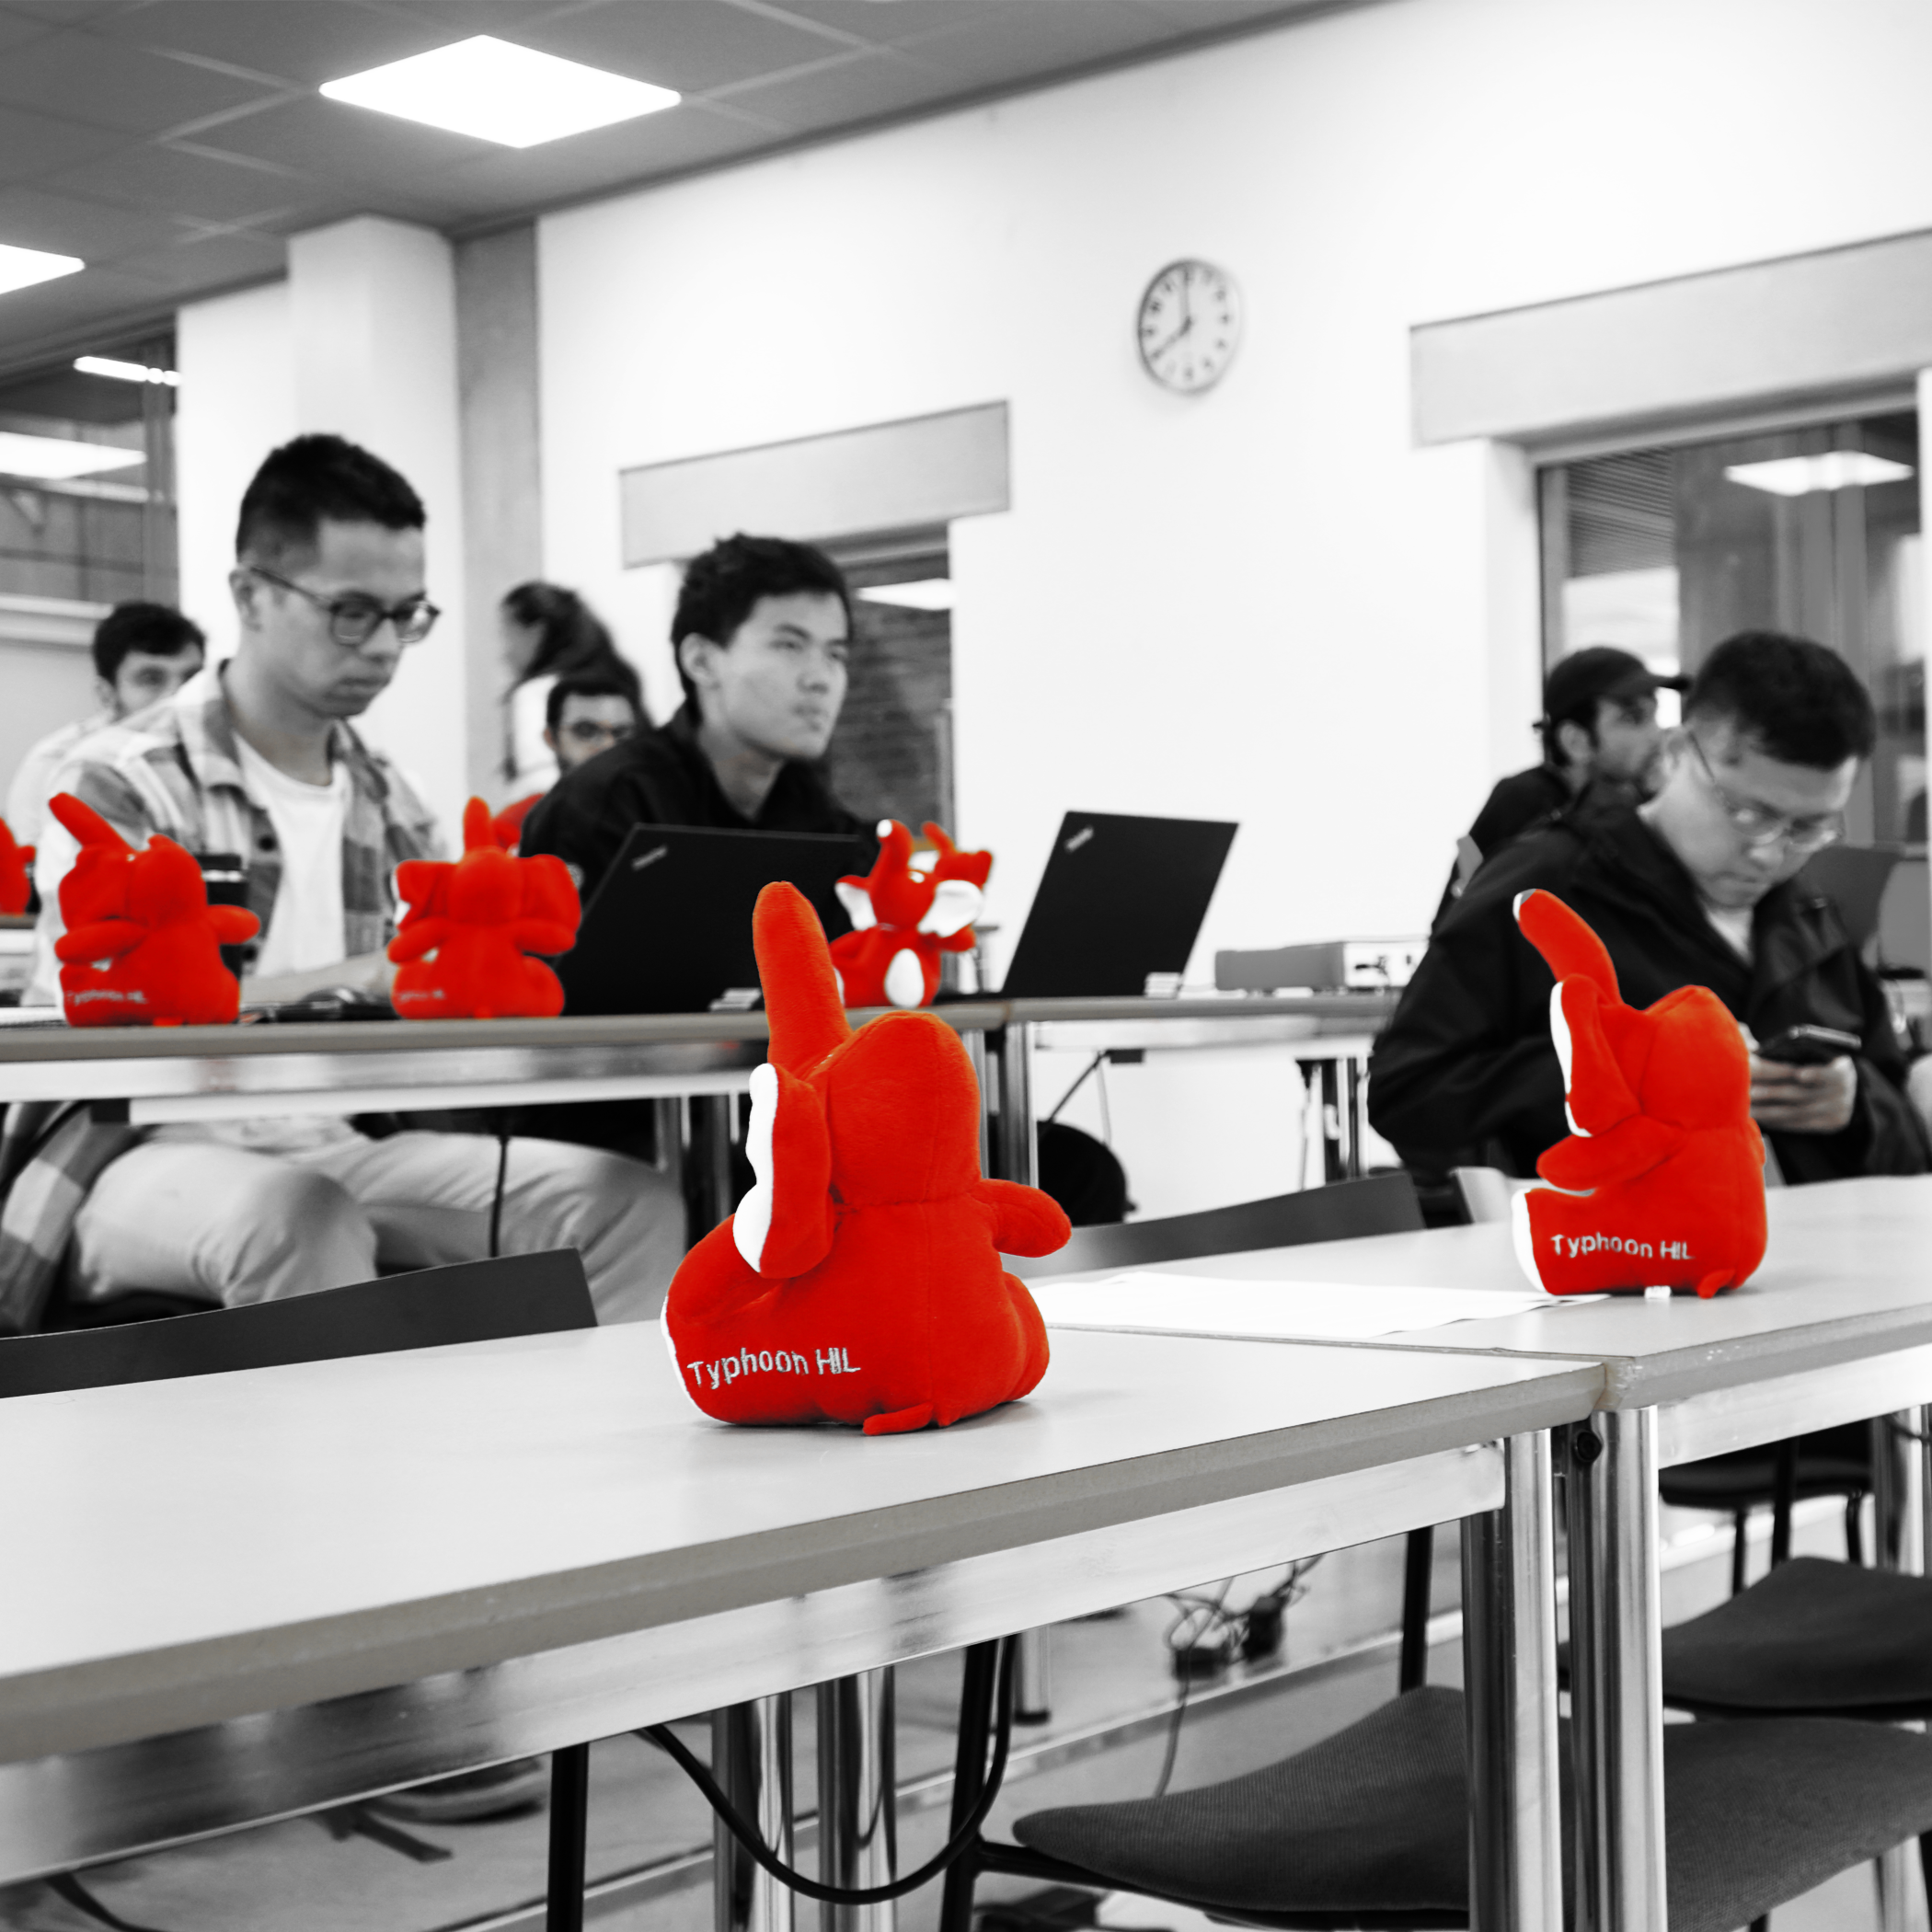 A group of people sitting in a classroom, with stuffed red elephants on their desks.